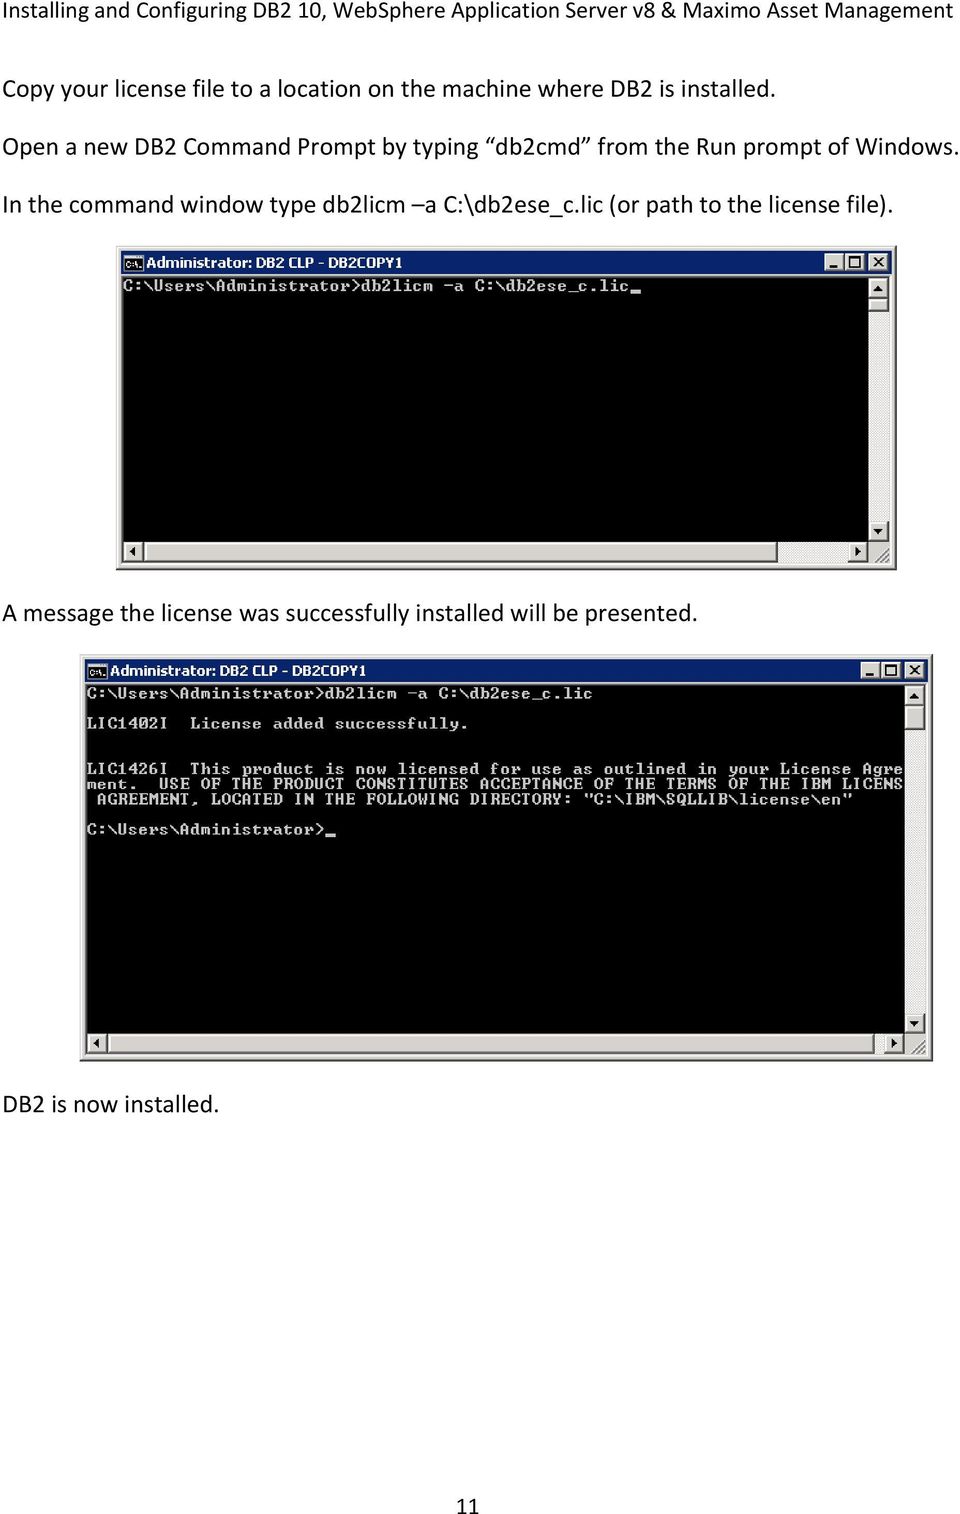 In the command window type db2licm a C:\db2ese_c.lic (or path to the license file).